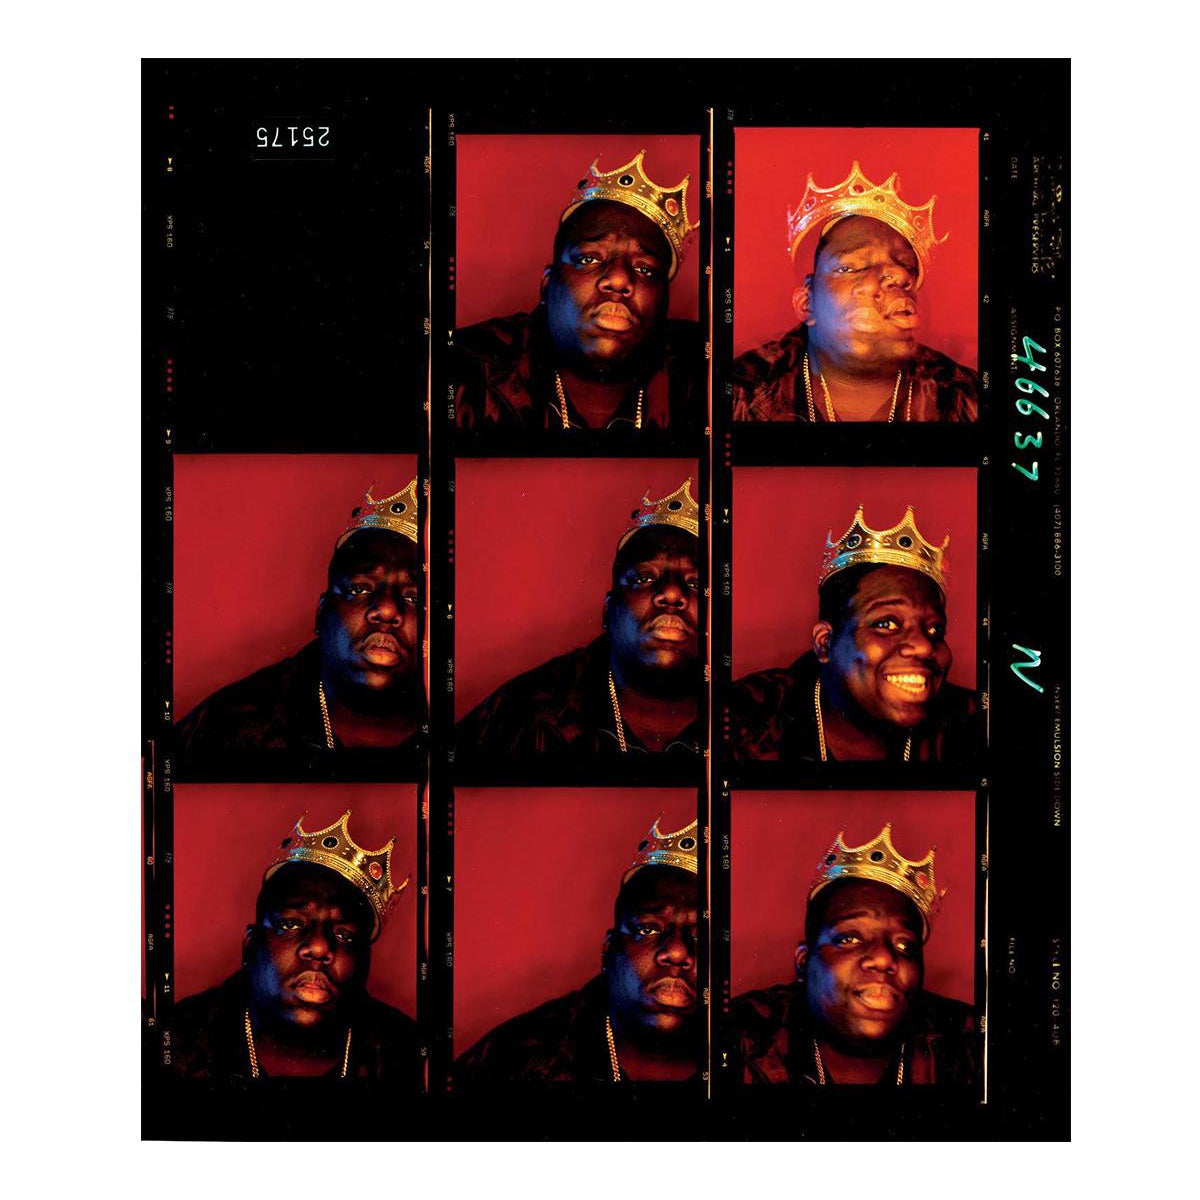 Contact Sheet (Notorious B.I.G. as the [K.O.N.Y.]) For Sale